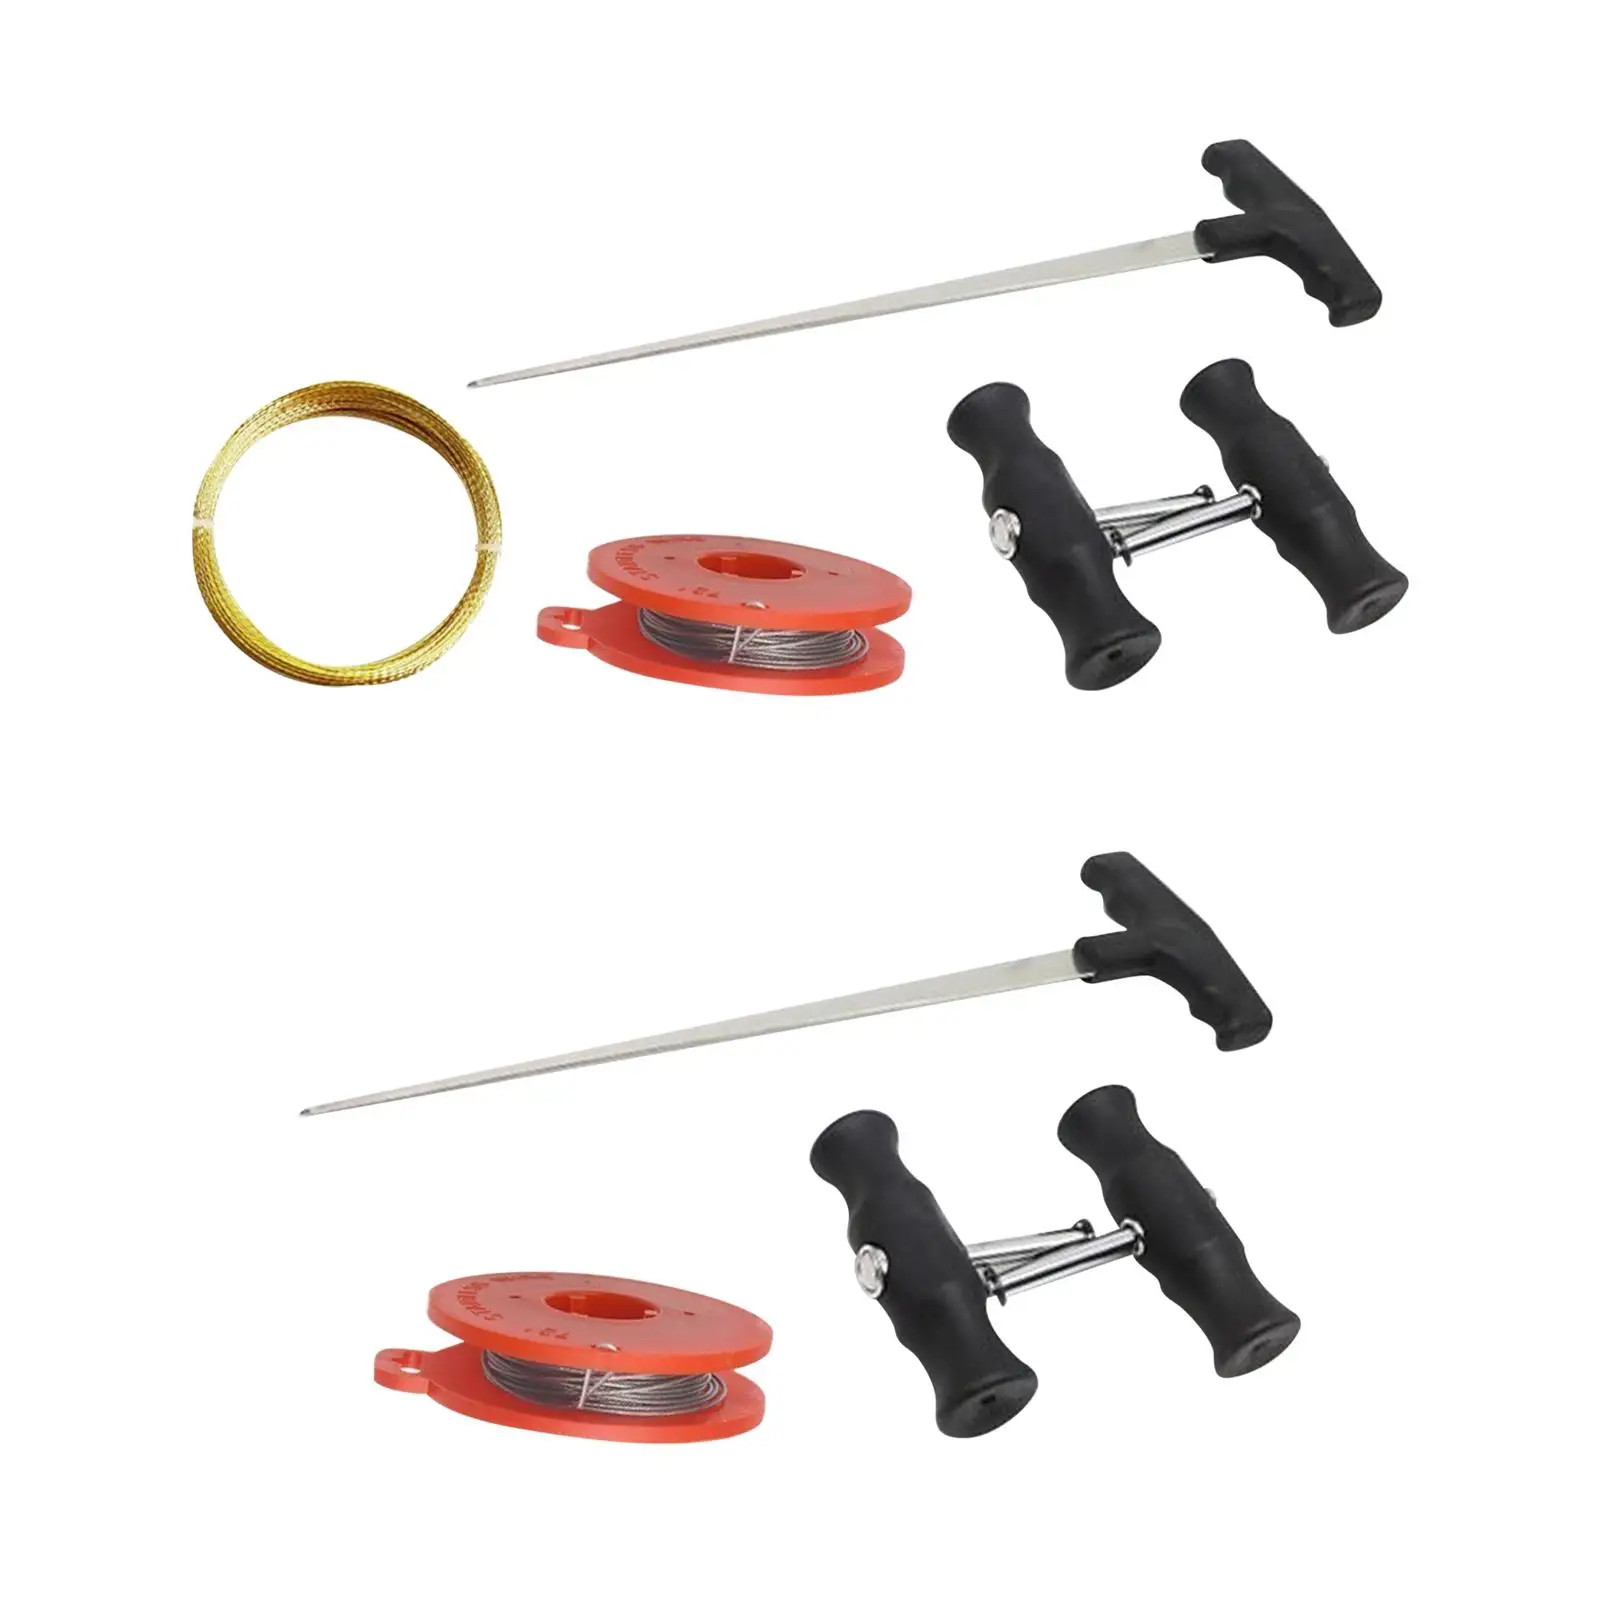 Auto Windshield Removal Tools Set Quality Compact Durable Car Glass Disassembly Non Slip with Steel Wire Wind Glass Remover